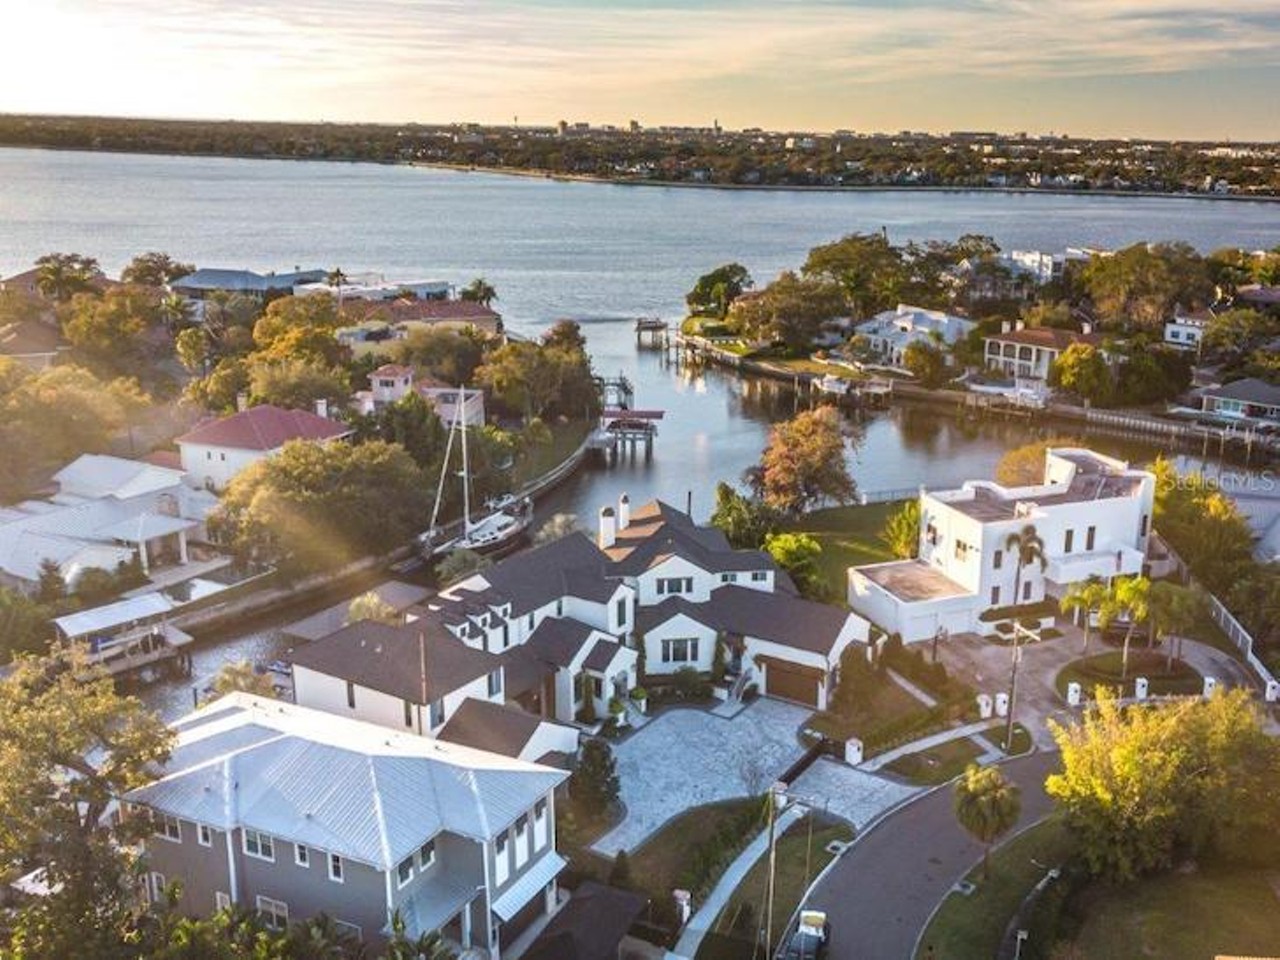 Armature Works developer 'Chas' Bruck is selling his Davis Islands home for $11 million